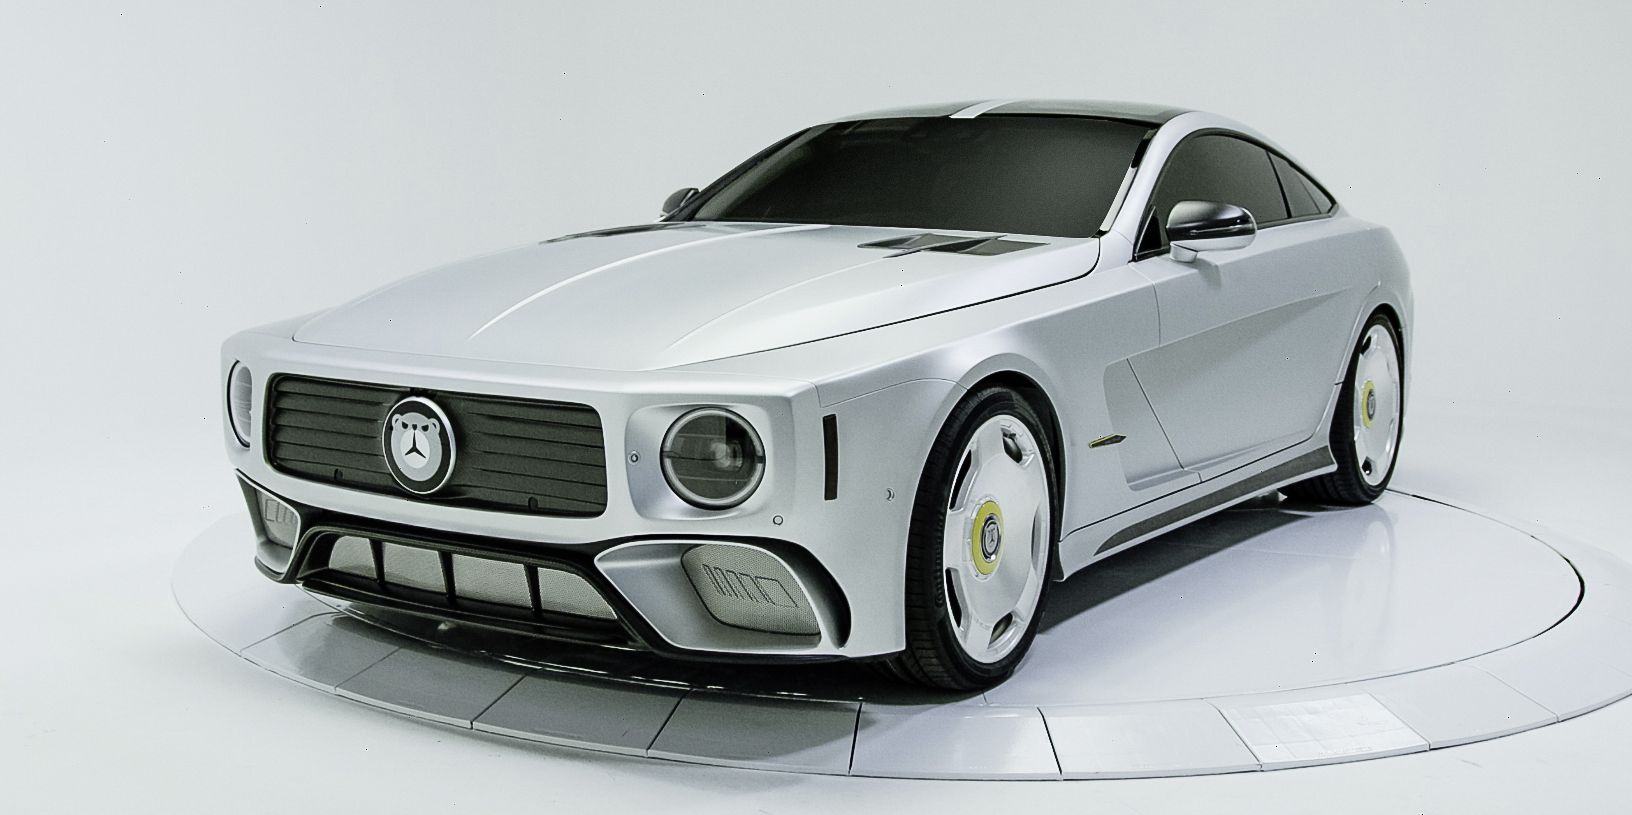 The WILL.I.AMG Is a G-Wagen-Faced Coupe Concept With Suicide Doors